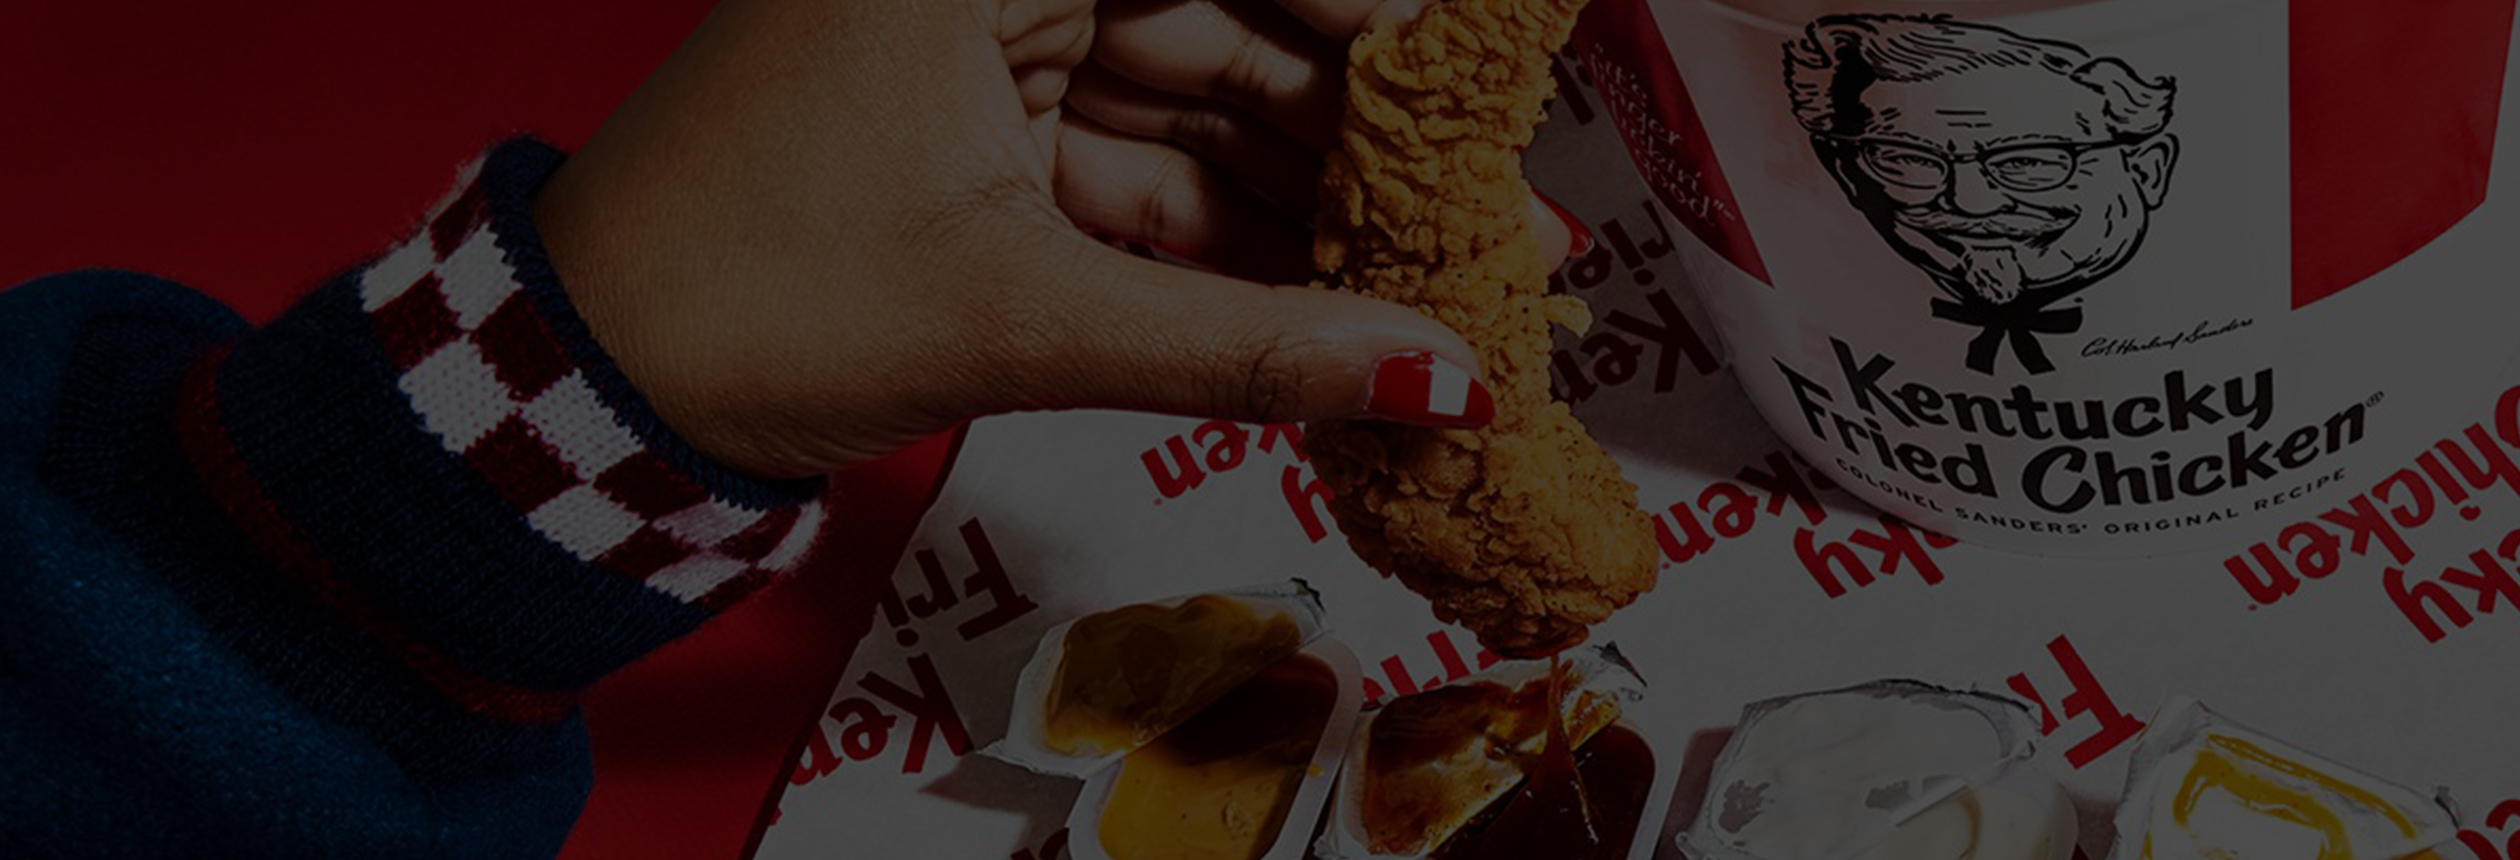 Podcast about KFC advertising & branding